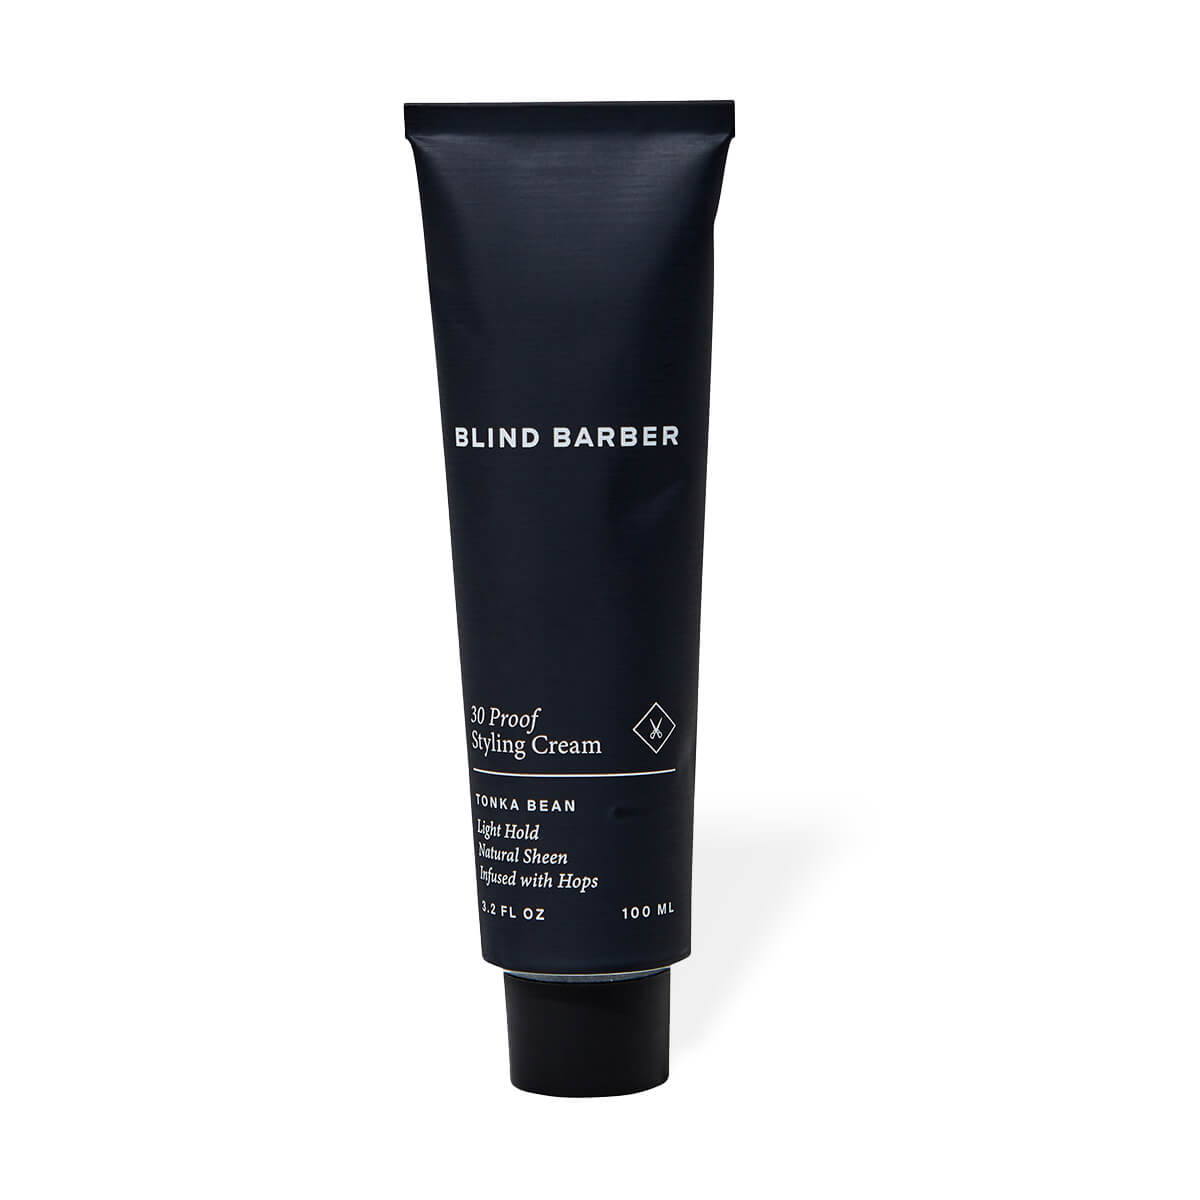 30 proof styling cream by blind barber